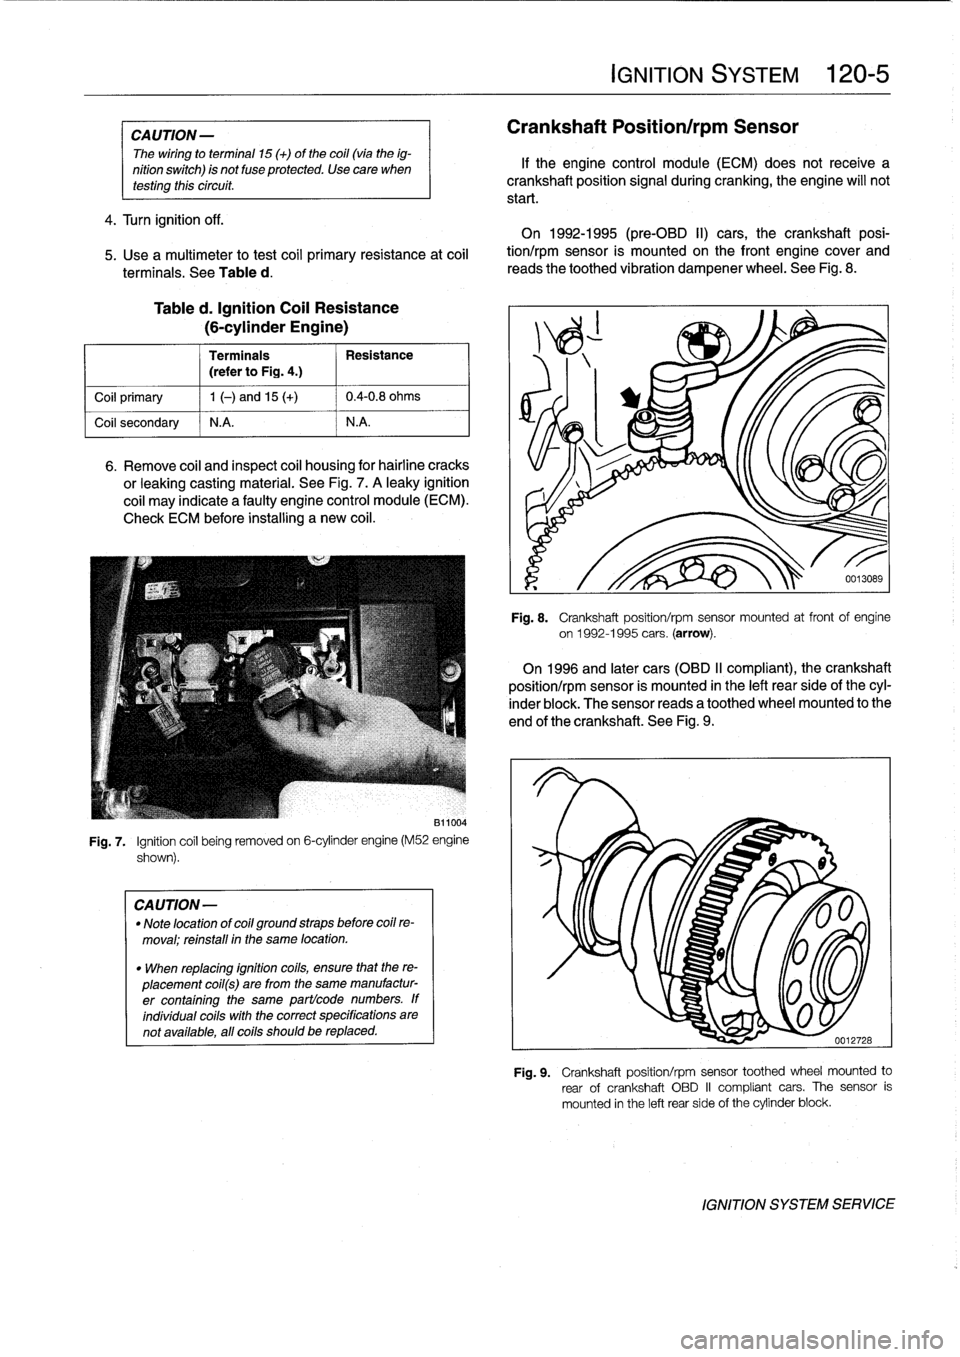 BMW 323i 1993 E36 Workshop Manual 
CAUTION
-

The
wiring
to
termina¡
15
(+)
of
the
coil(vía
the
ig-

nition
switch)
is
not
fuse
protected
.
Use
care
when
testíng
thiscircuit
.

4
.
Turn
ignition
off
.

5
.
Use
a
multimeter
to
test
